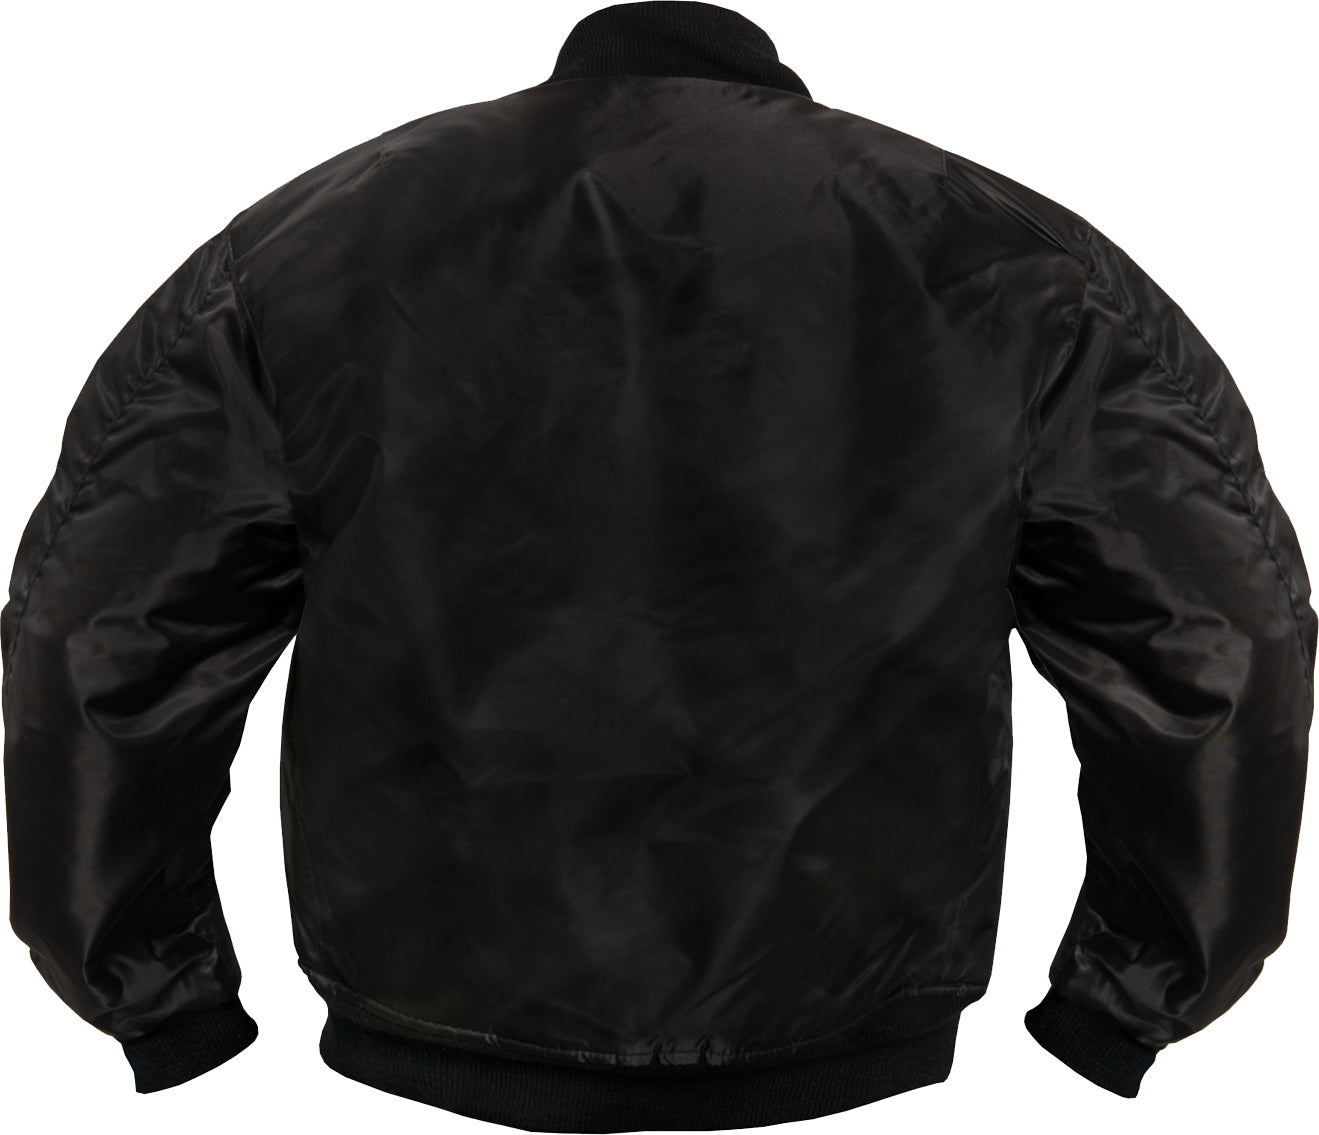 Top Gun MA 1 Nylon Bomber Jacket with Patches Black 